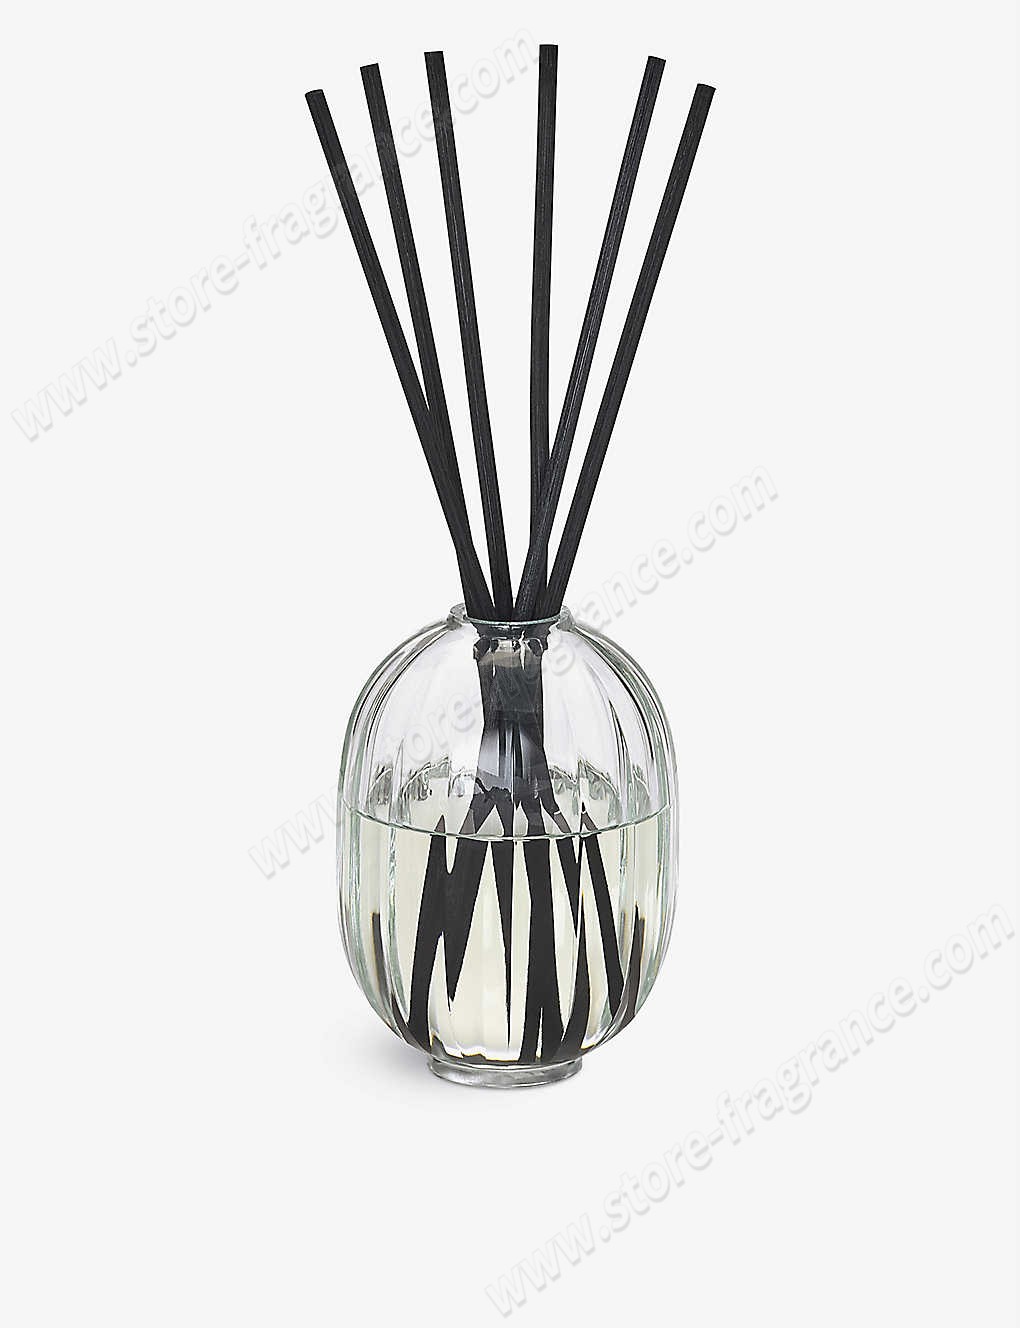 DIPTYQUE/Baies reed diffuser refill 200ml Limit Offer - DIPTYQUE/Baies reed diffuser refill 200ml Limit Offer